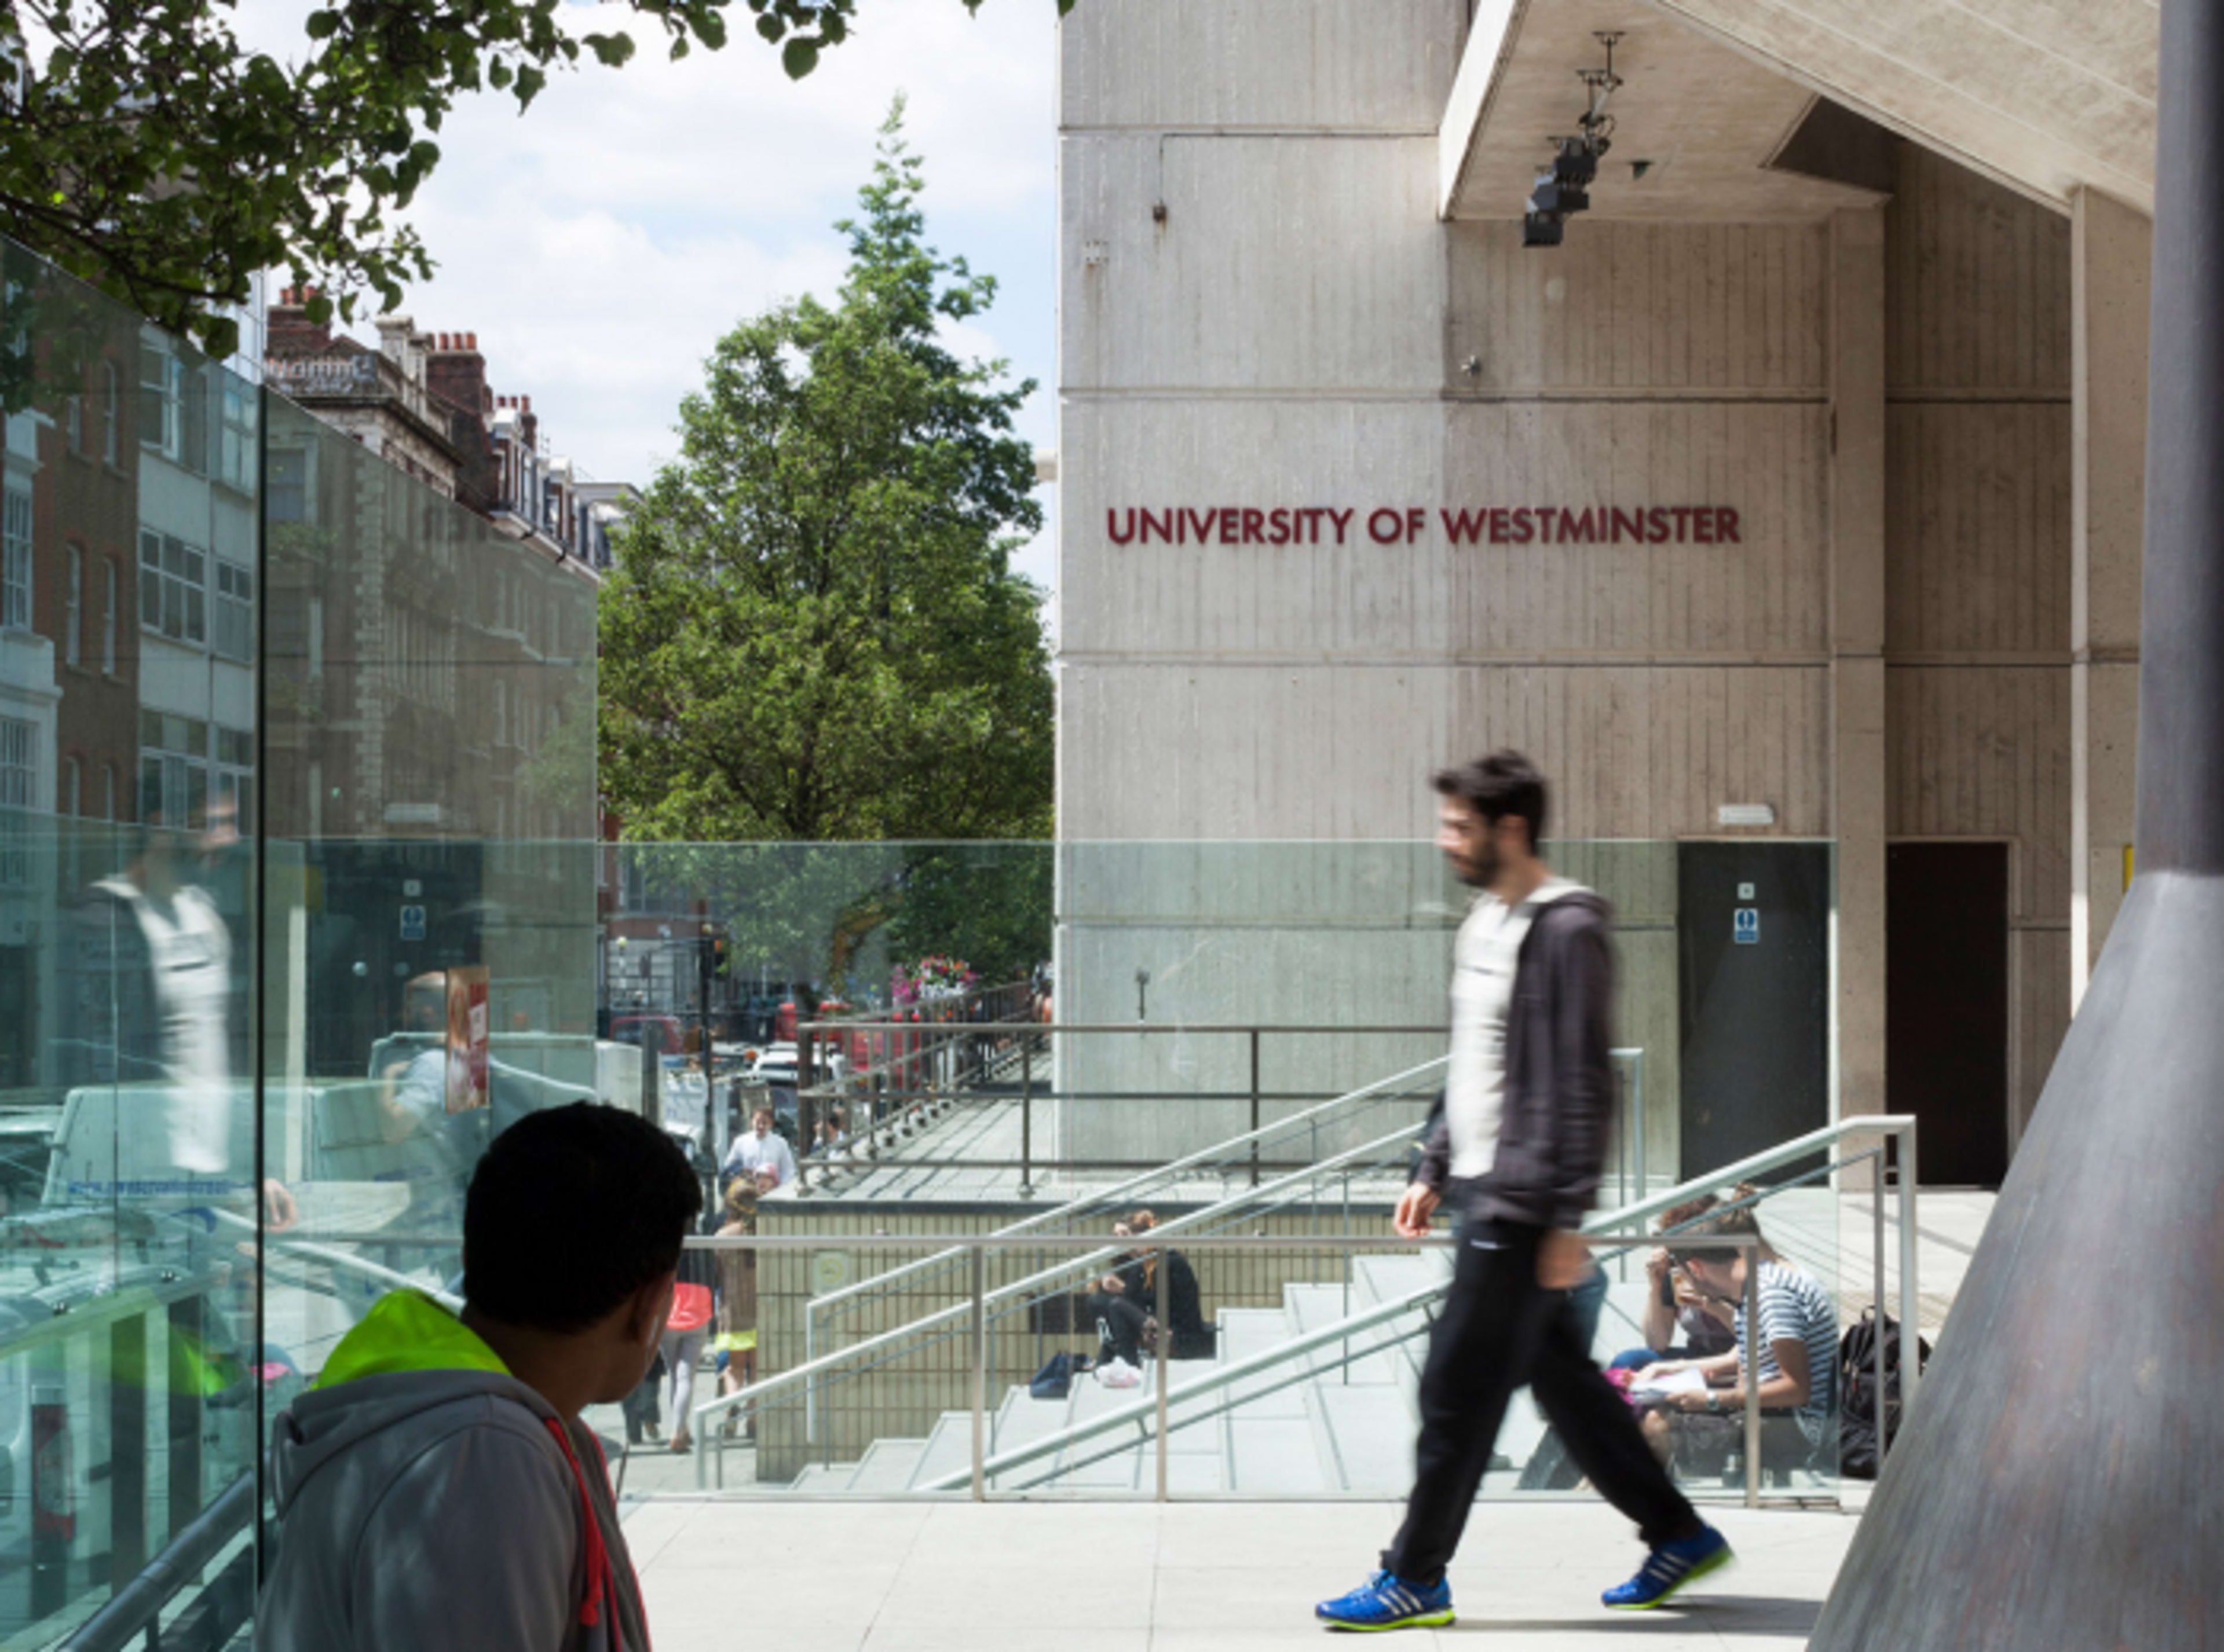 Exterior of the University of Westminster building with students walking past